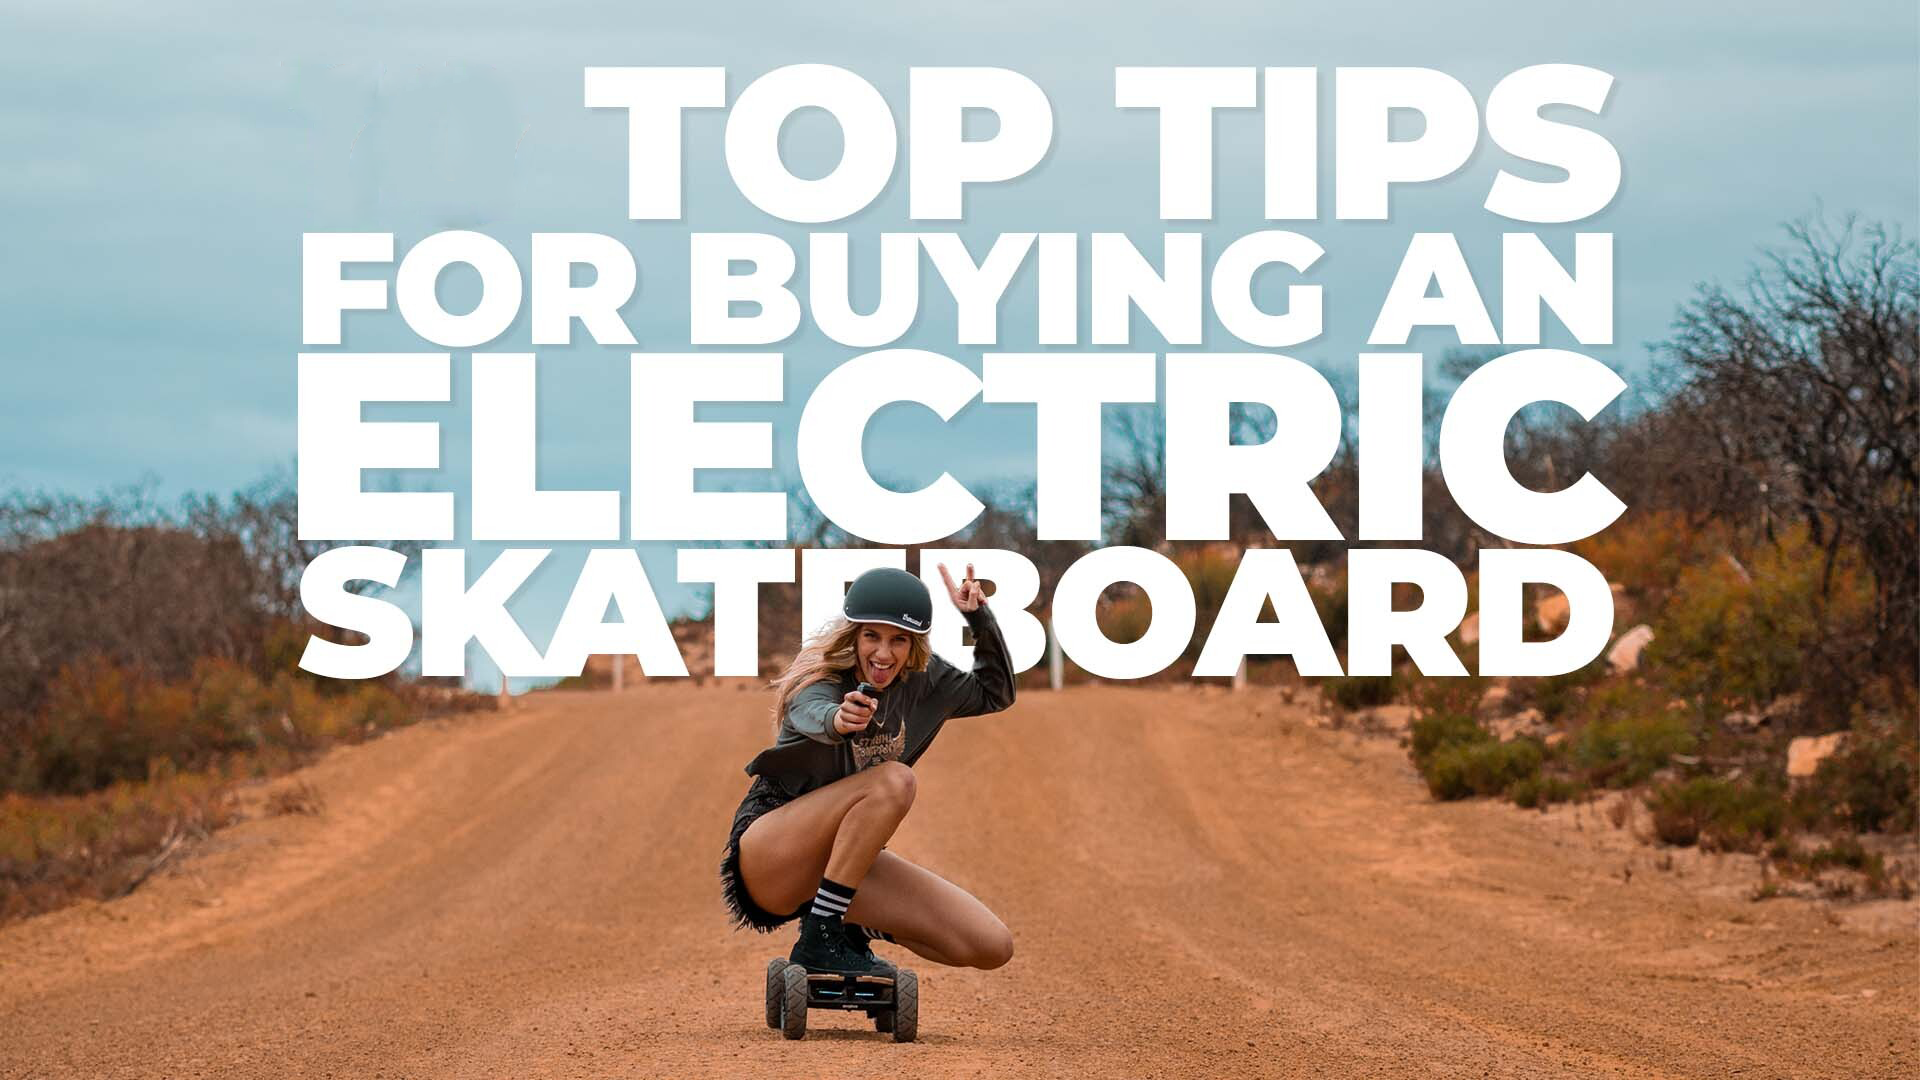 5 Top Tips for Buying an Electric Skateboard